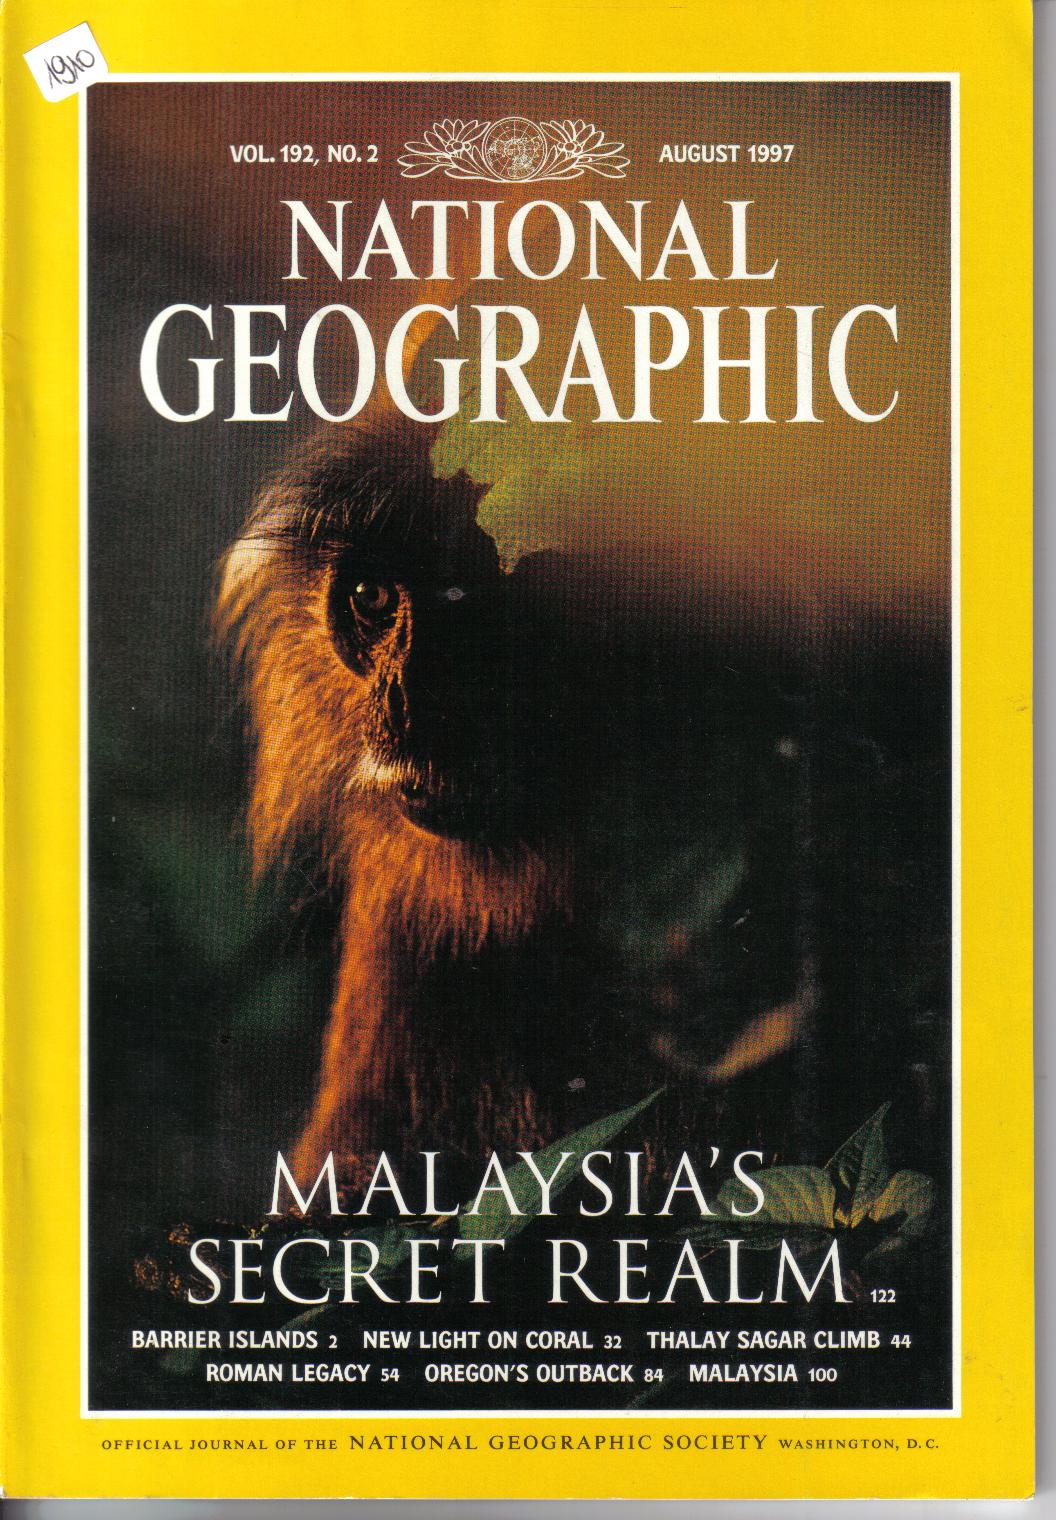 National Geographic Aug 97 englisch